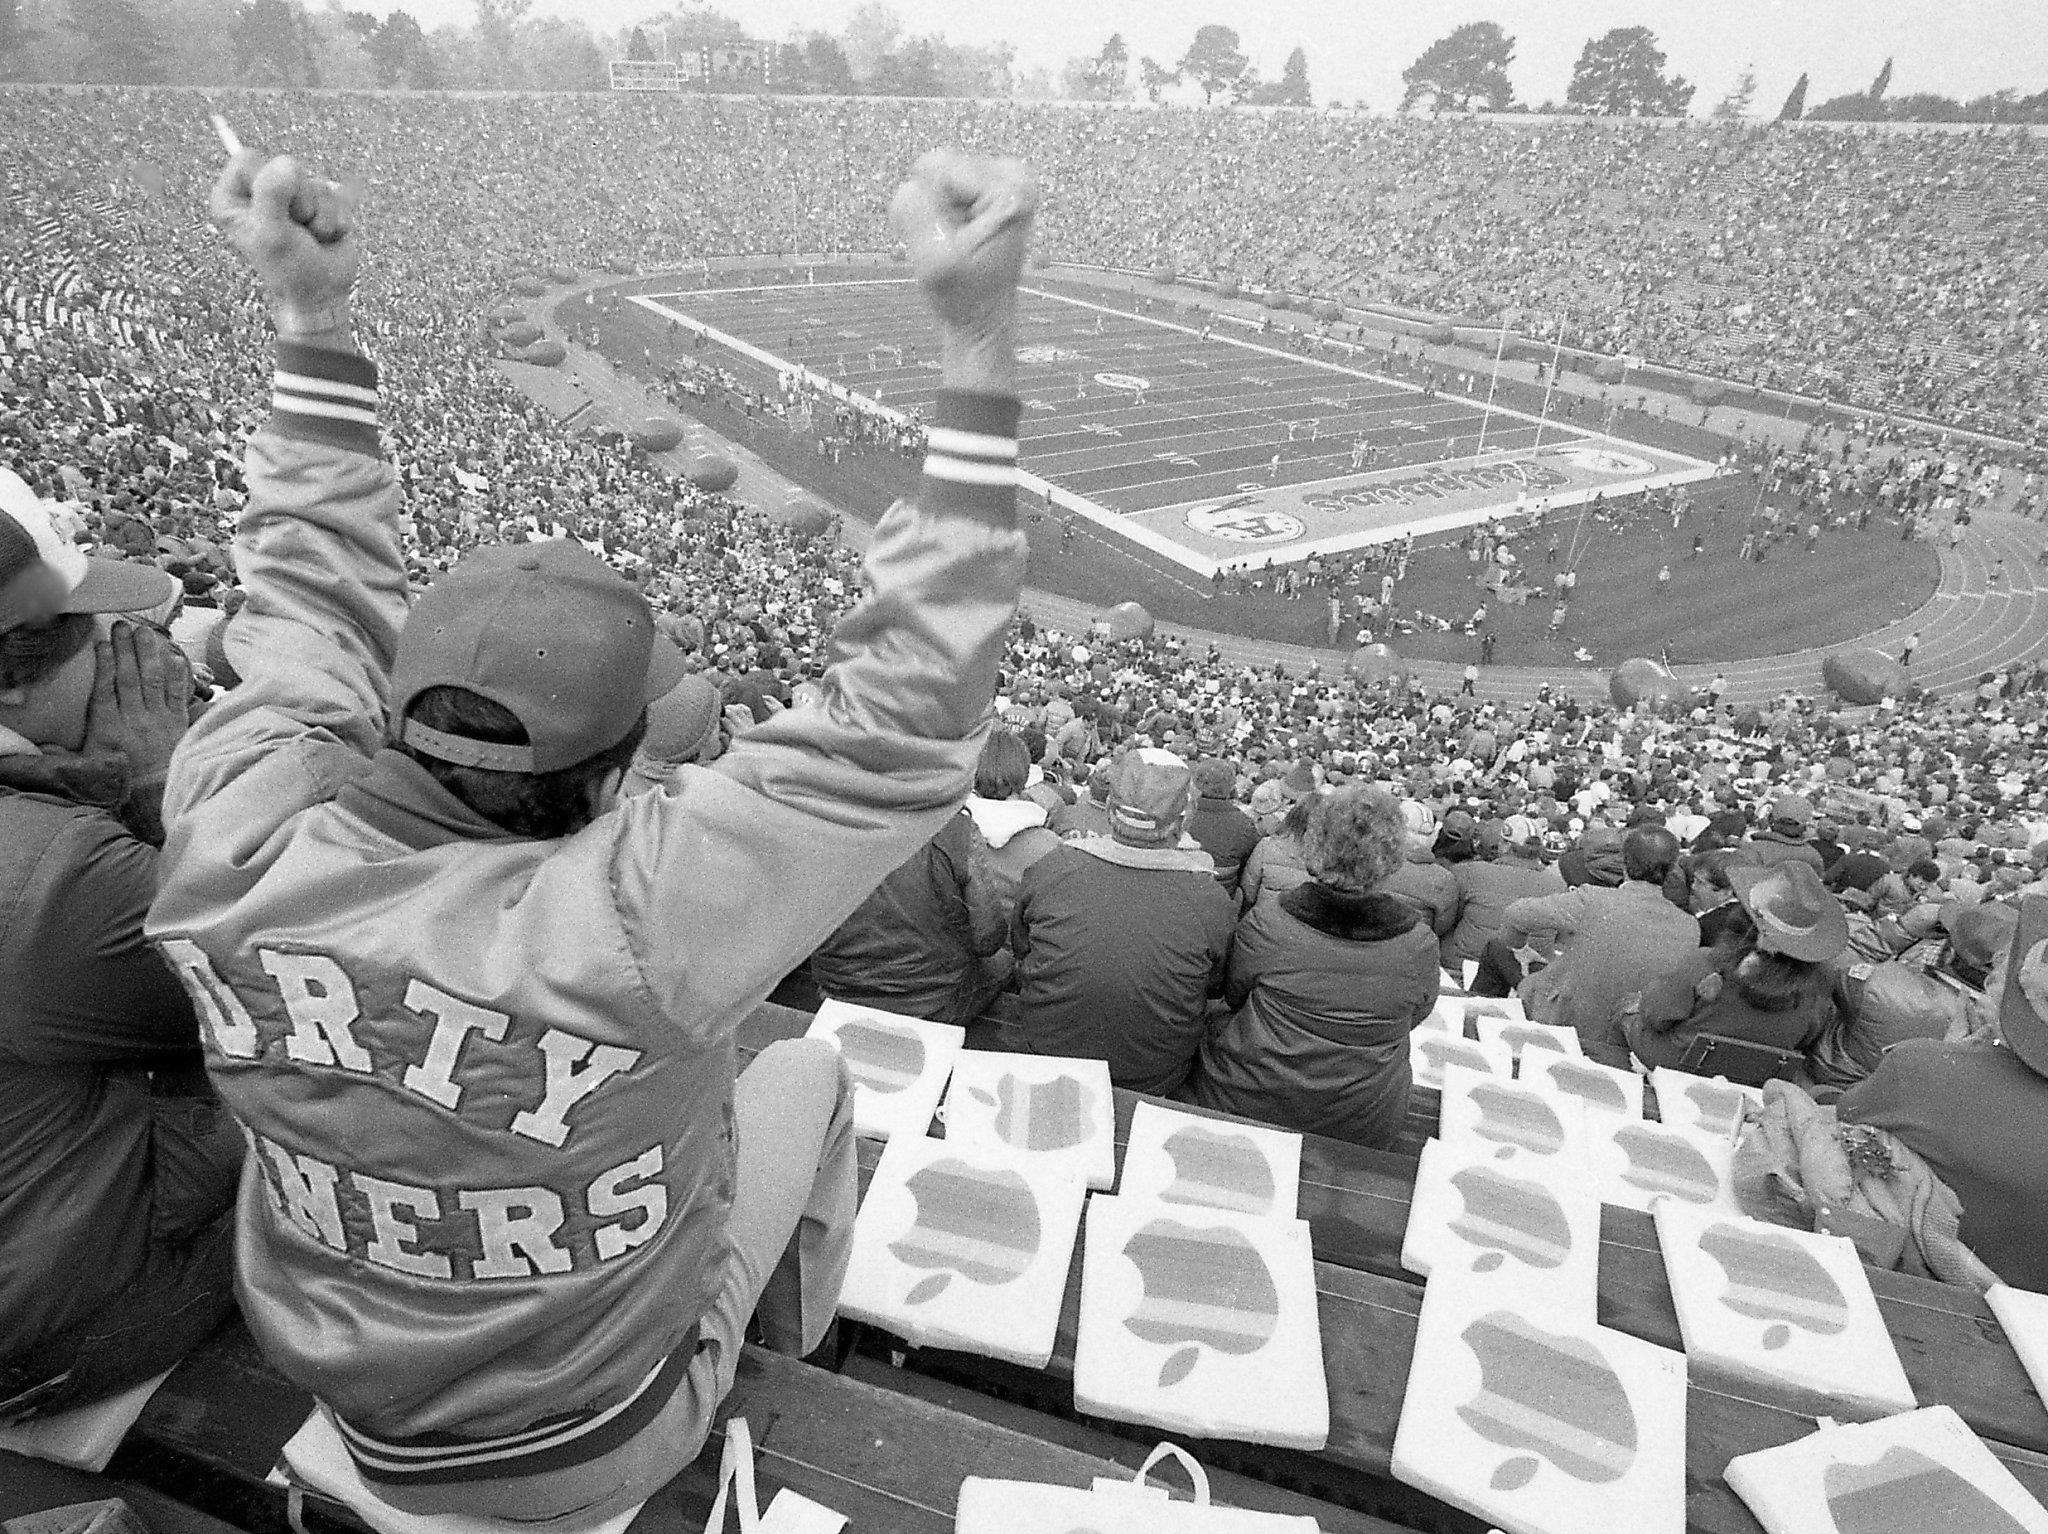 Stanford Stadium's limitations led to NFL innovations